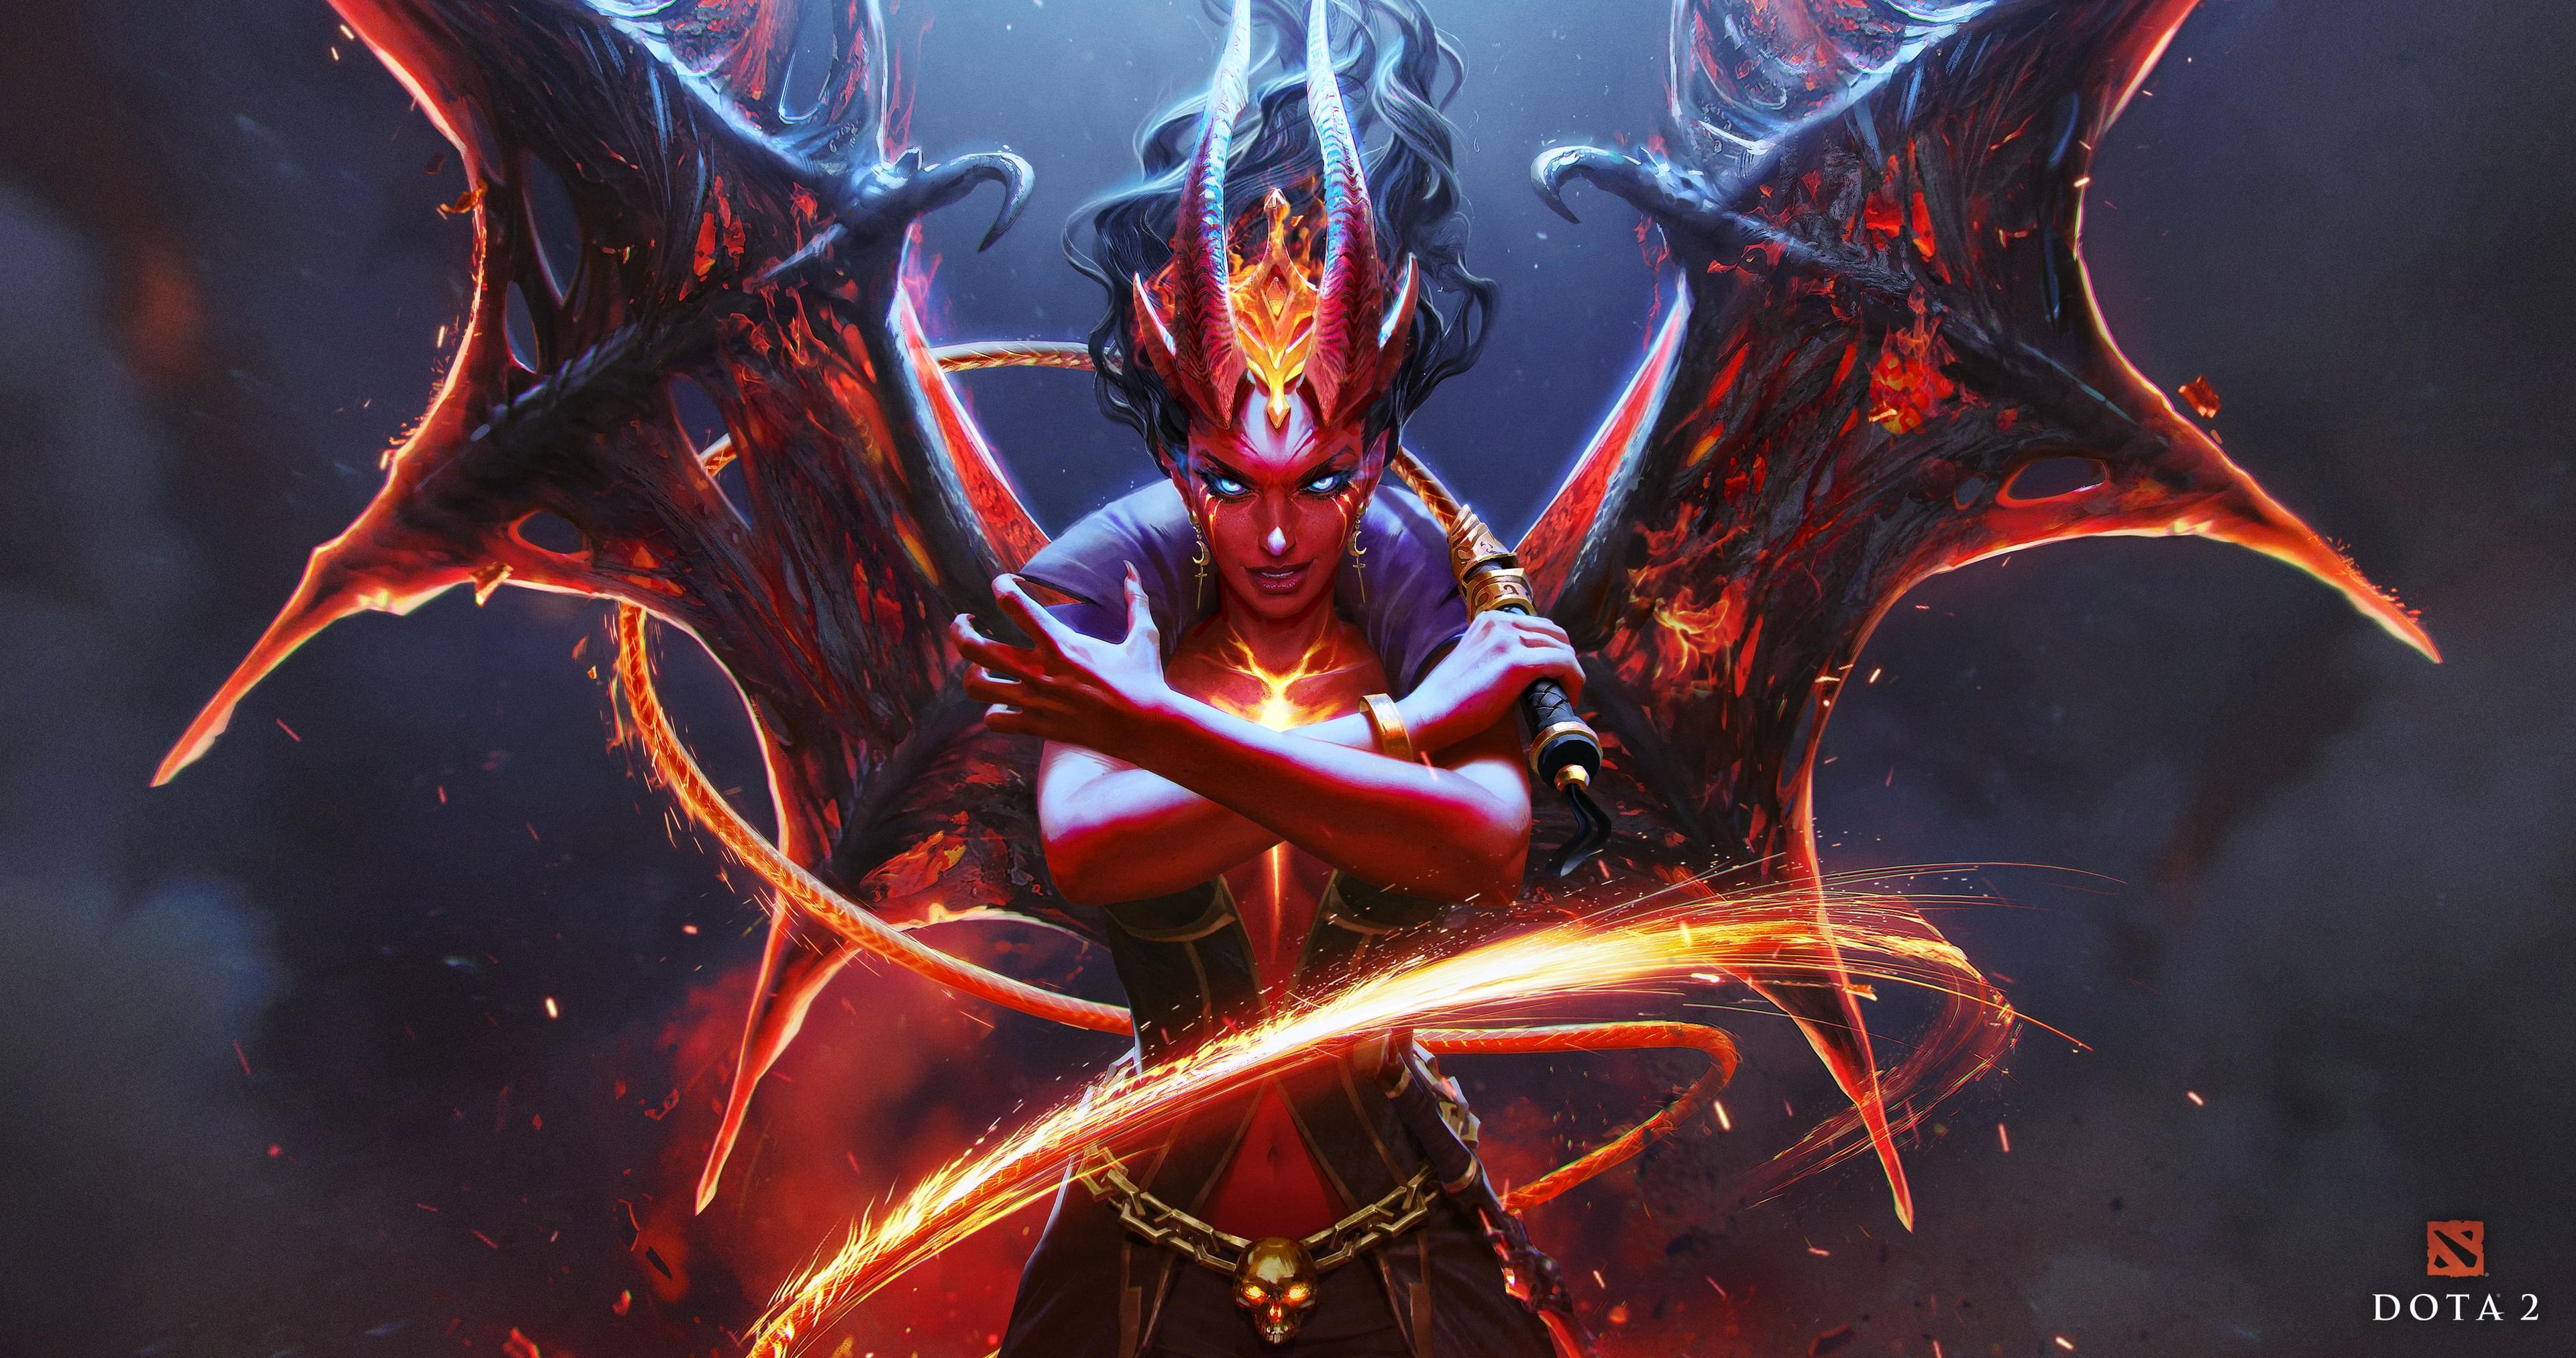 An image of Queen of Pain Arcana from Dota 2